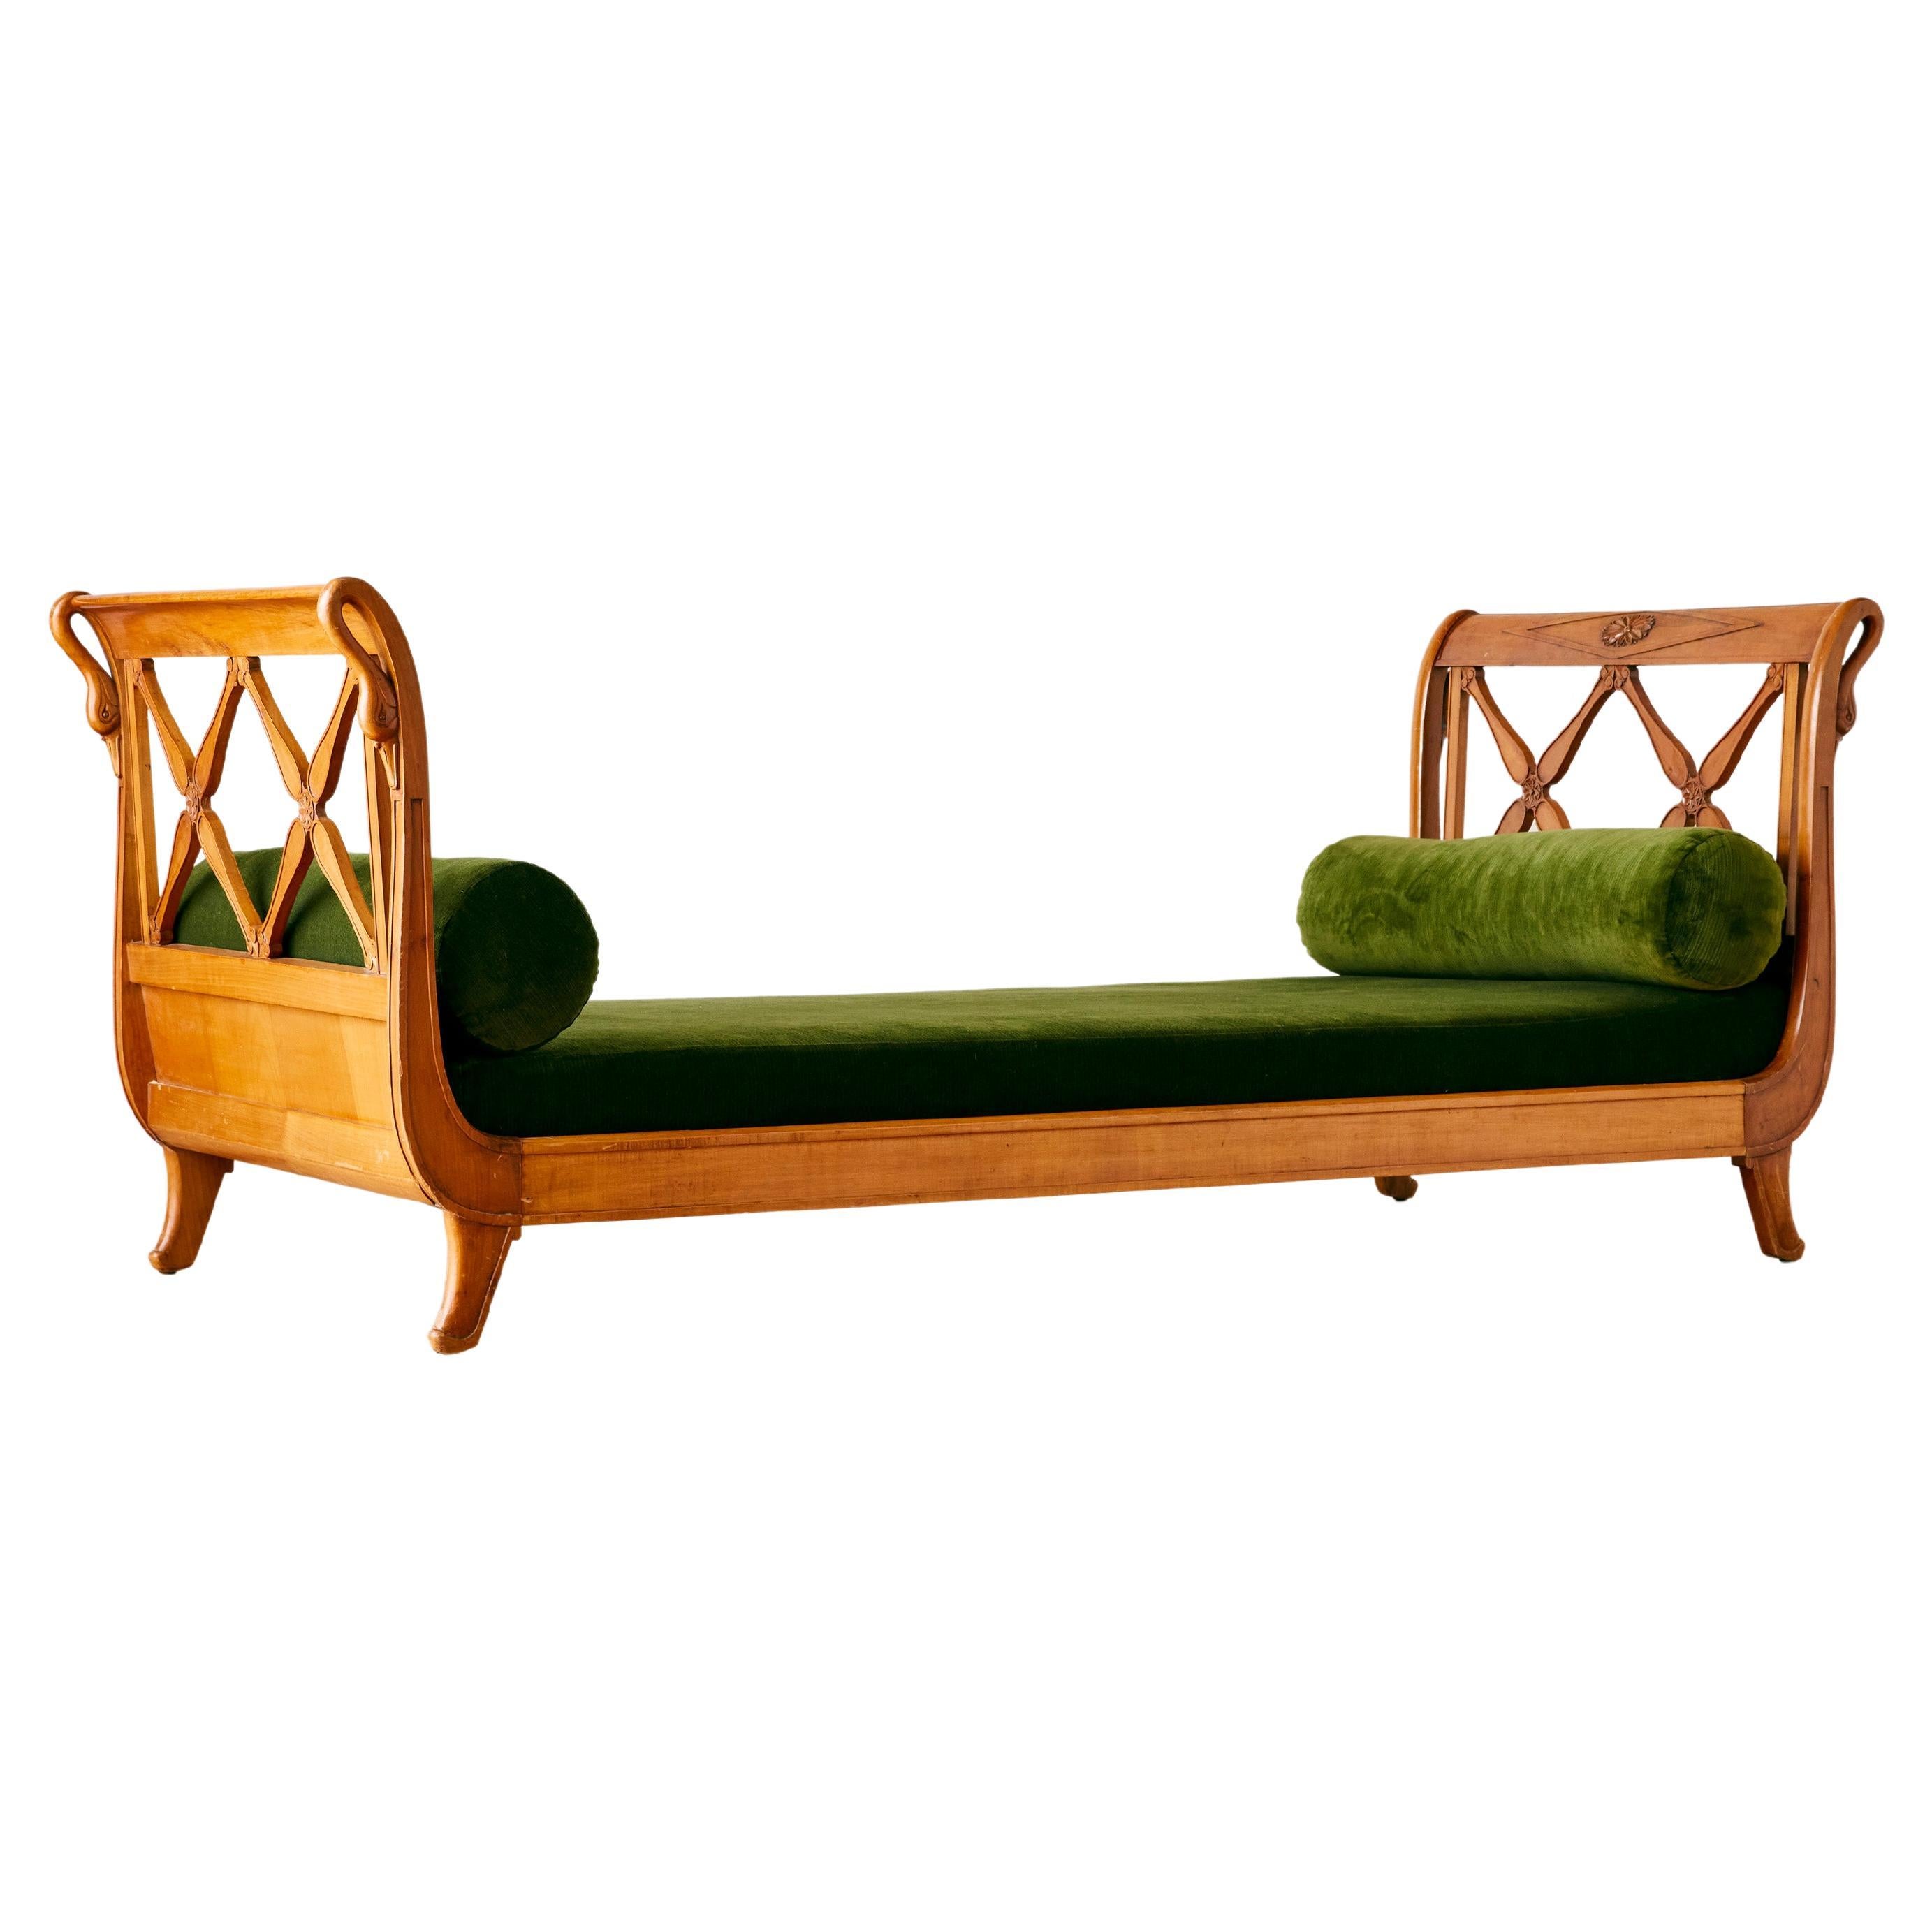 French Carved Daybed With Swan Details C. 1930 For Sale